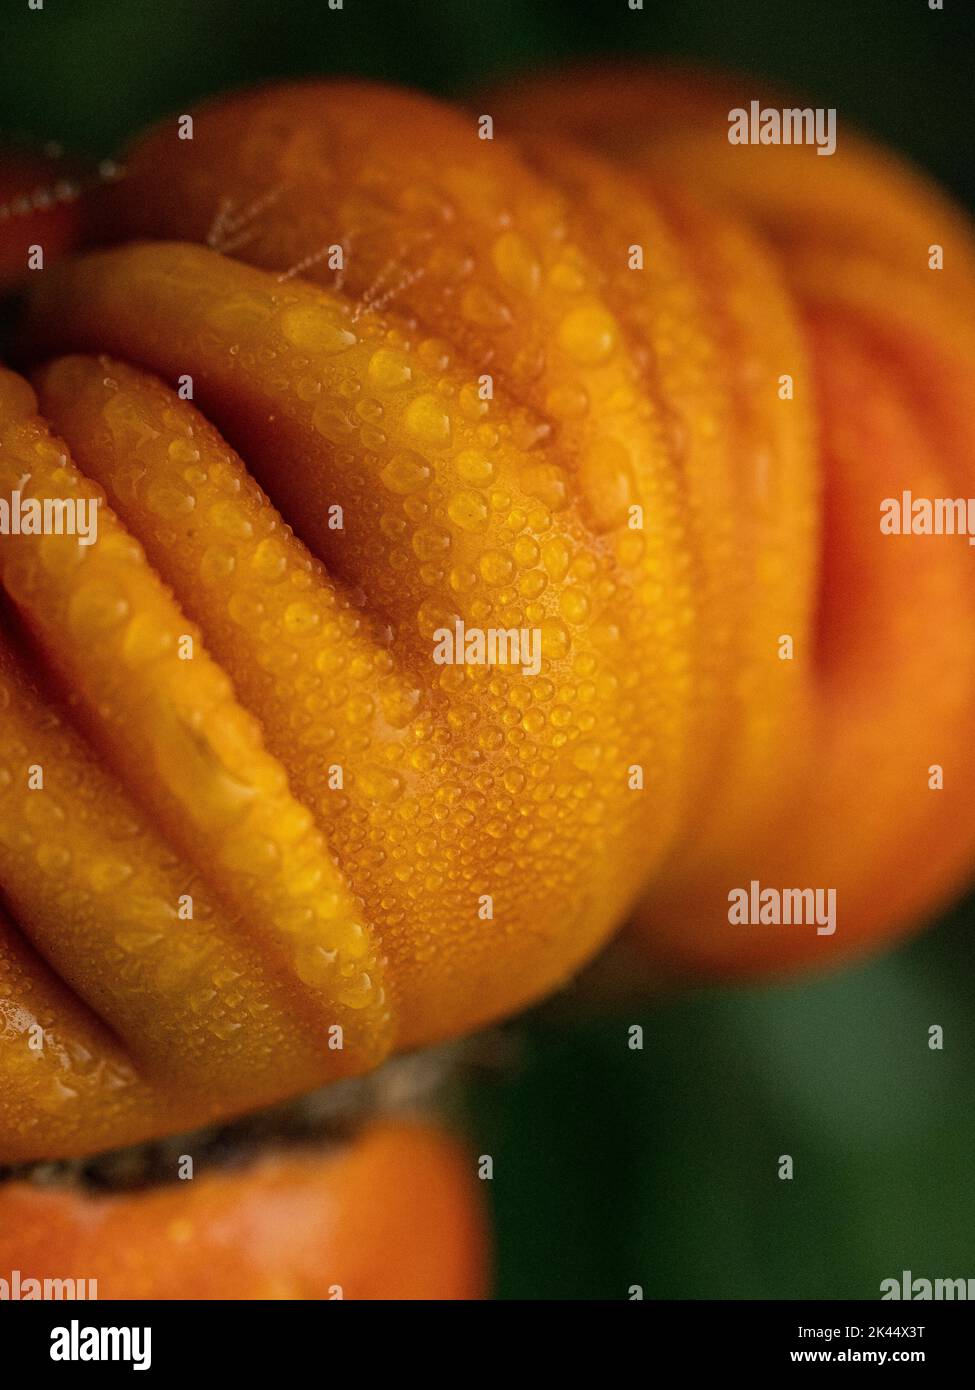 A close up of dewdrops on the orange ridged fruit of the outdoor tomato 'Castoluto Florentino'. Stock Photo